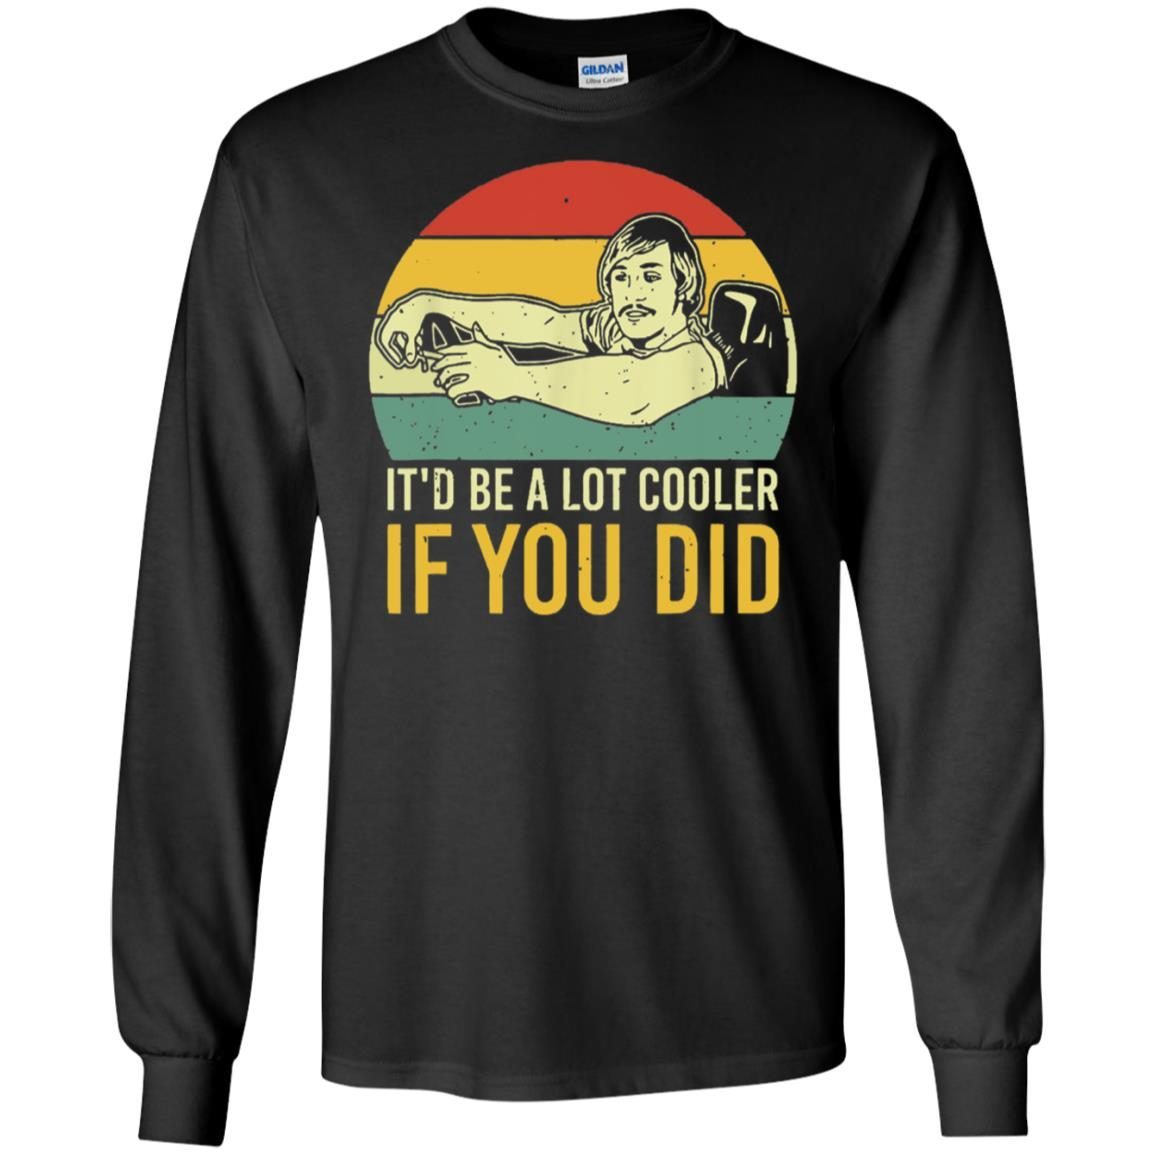 David Wooderson Vintage Itd Be A Lot Cooler If You Did shirt